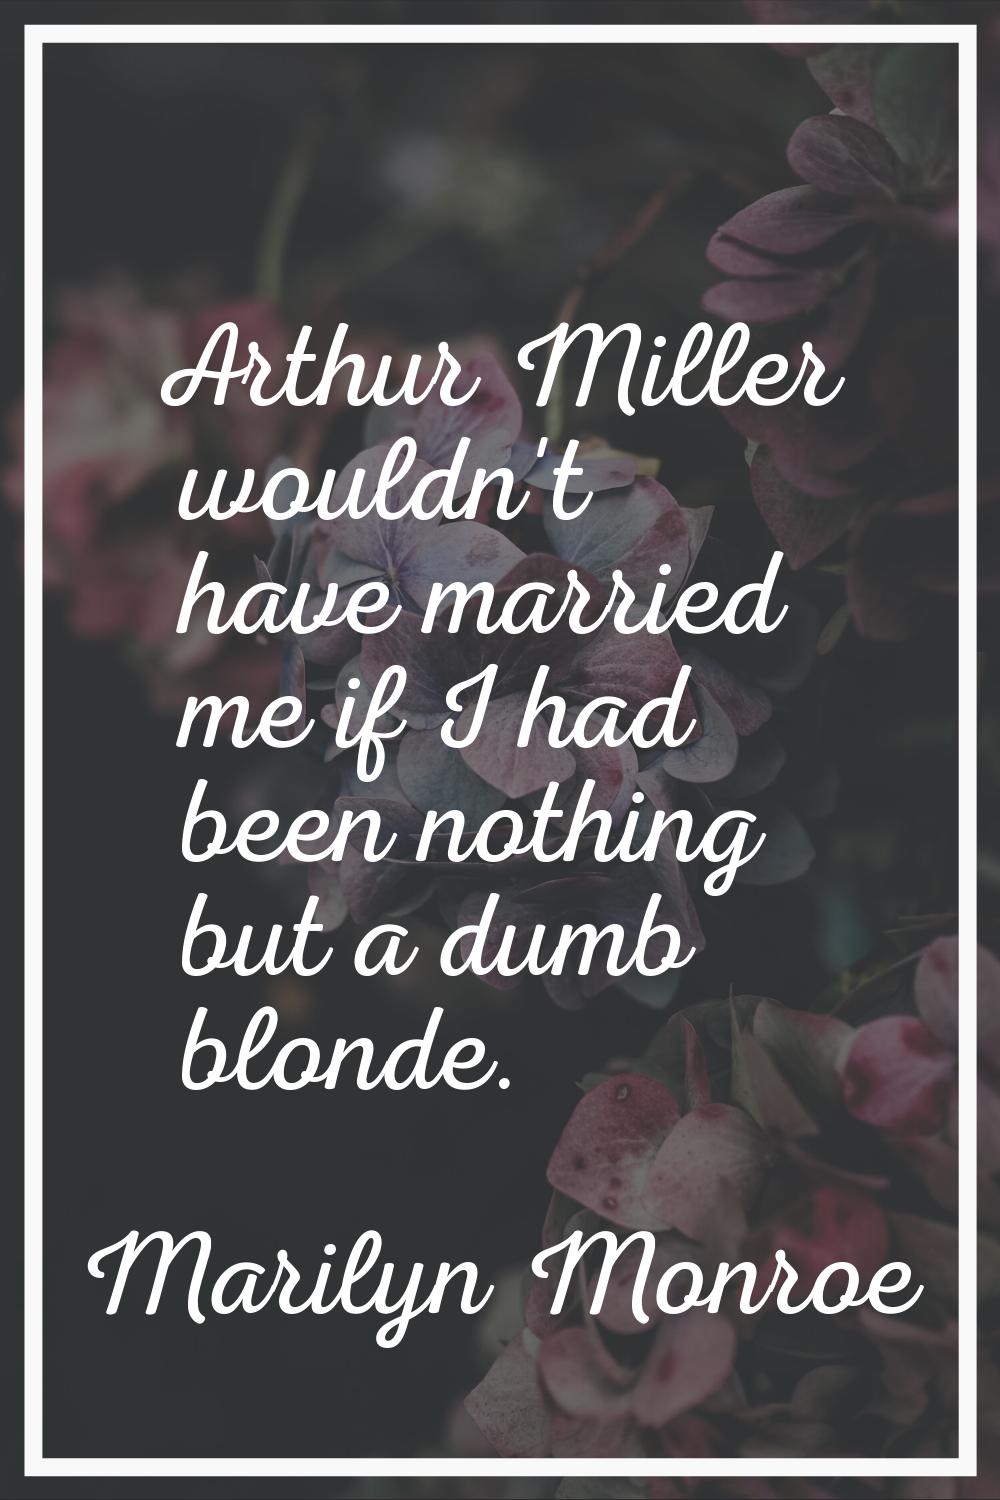 Arthur Miller wouldn't have married me if I had been nothing but a dumb blonde.